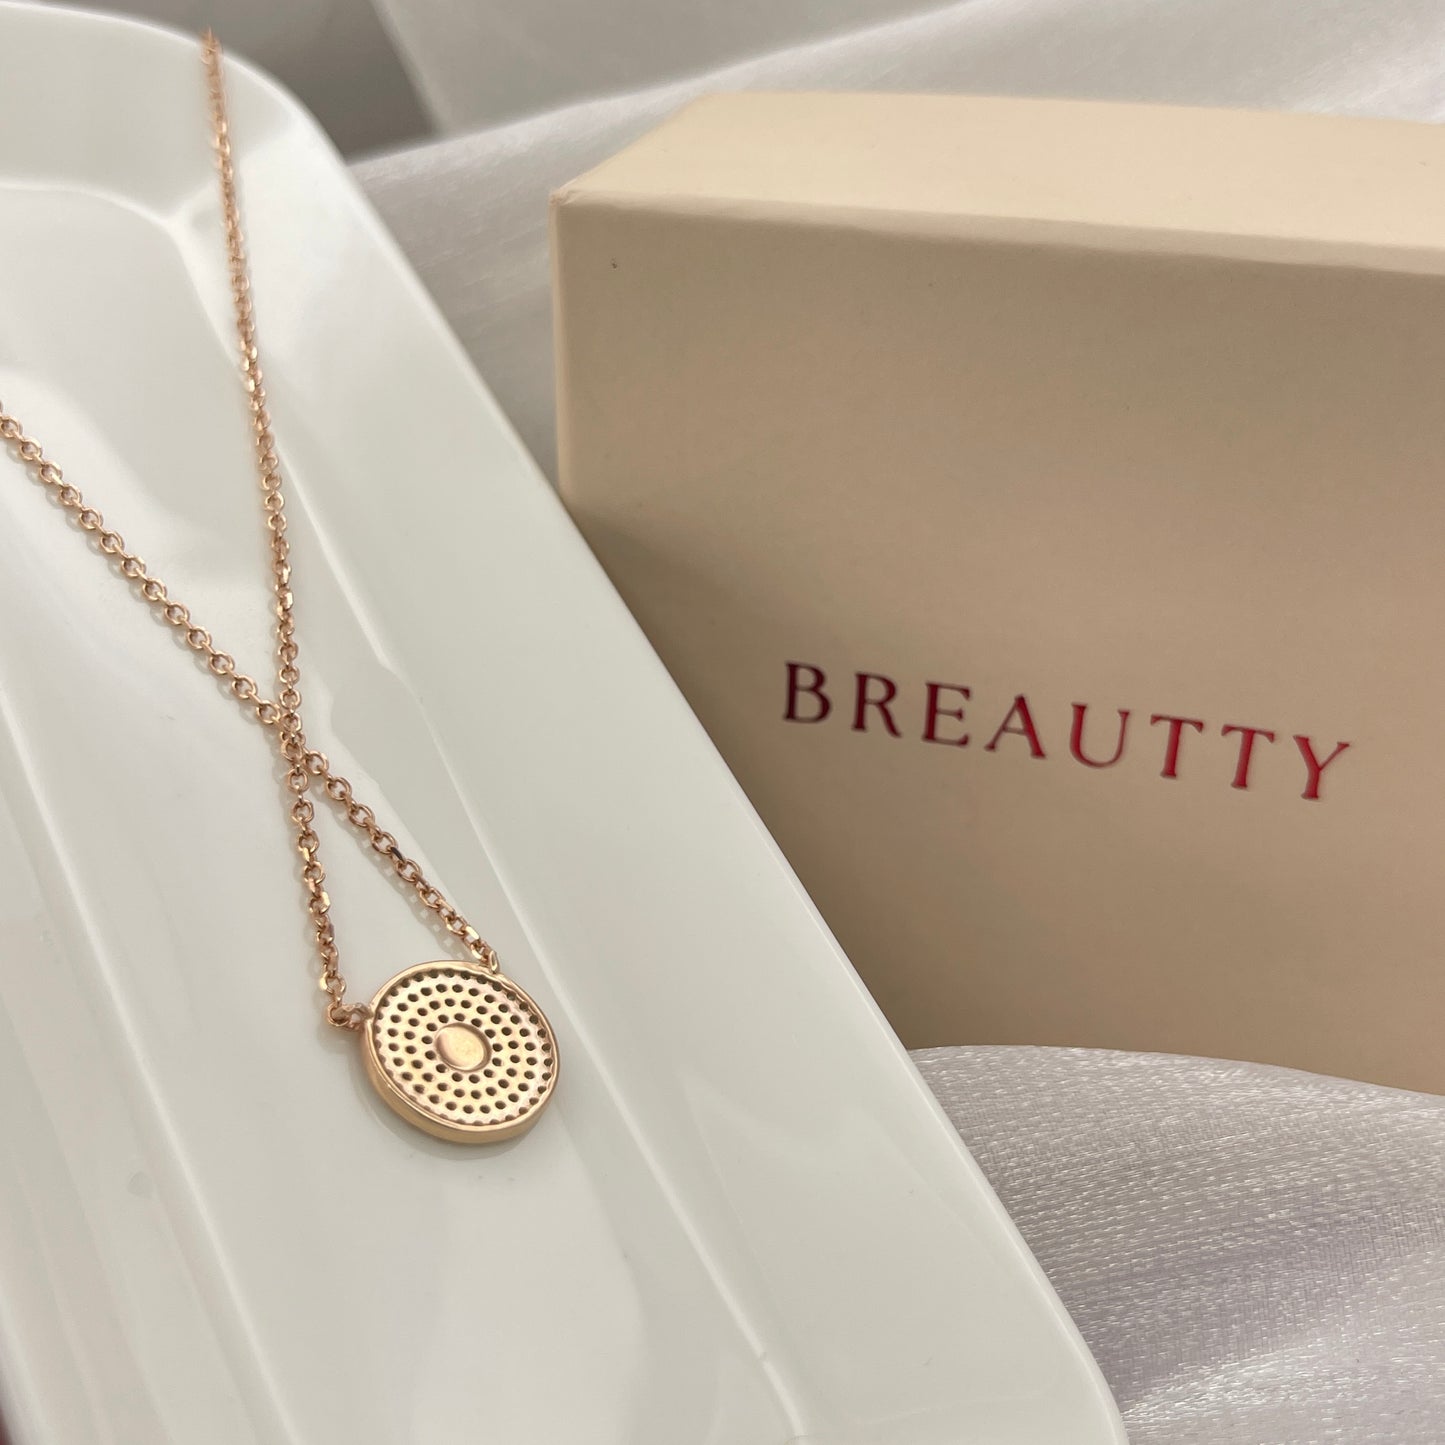 BREAUTTY 925 STERLING SILVER GREEK EVIL EYE NECKLACE IN DELICATE BOHO STYLE | ROSE GOLD PLATING